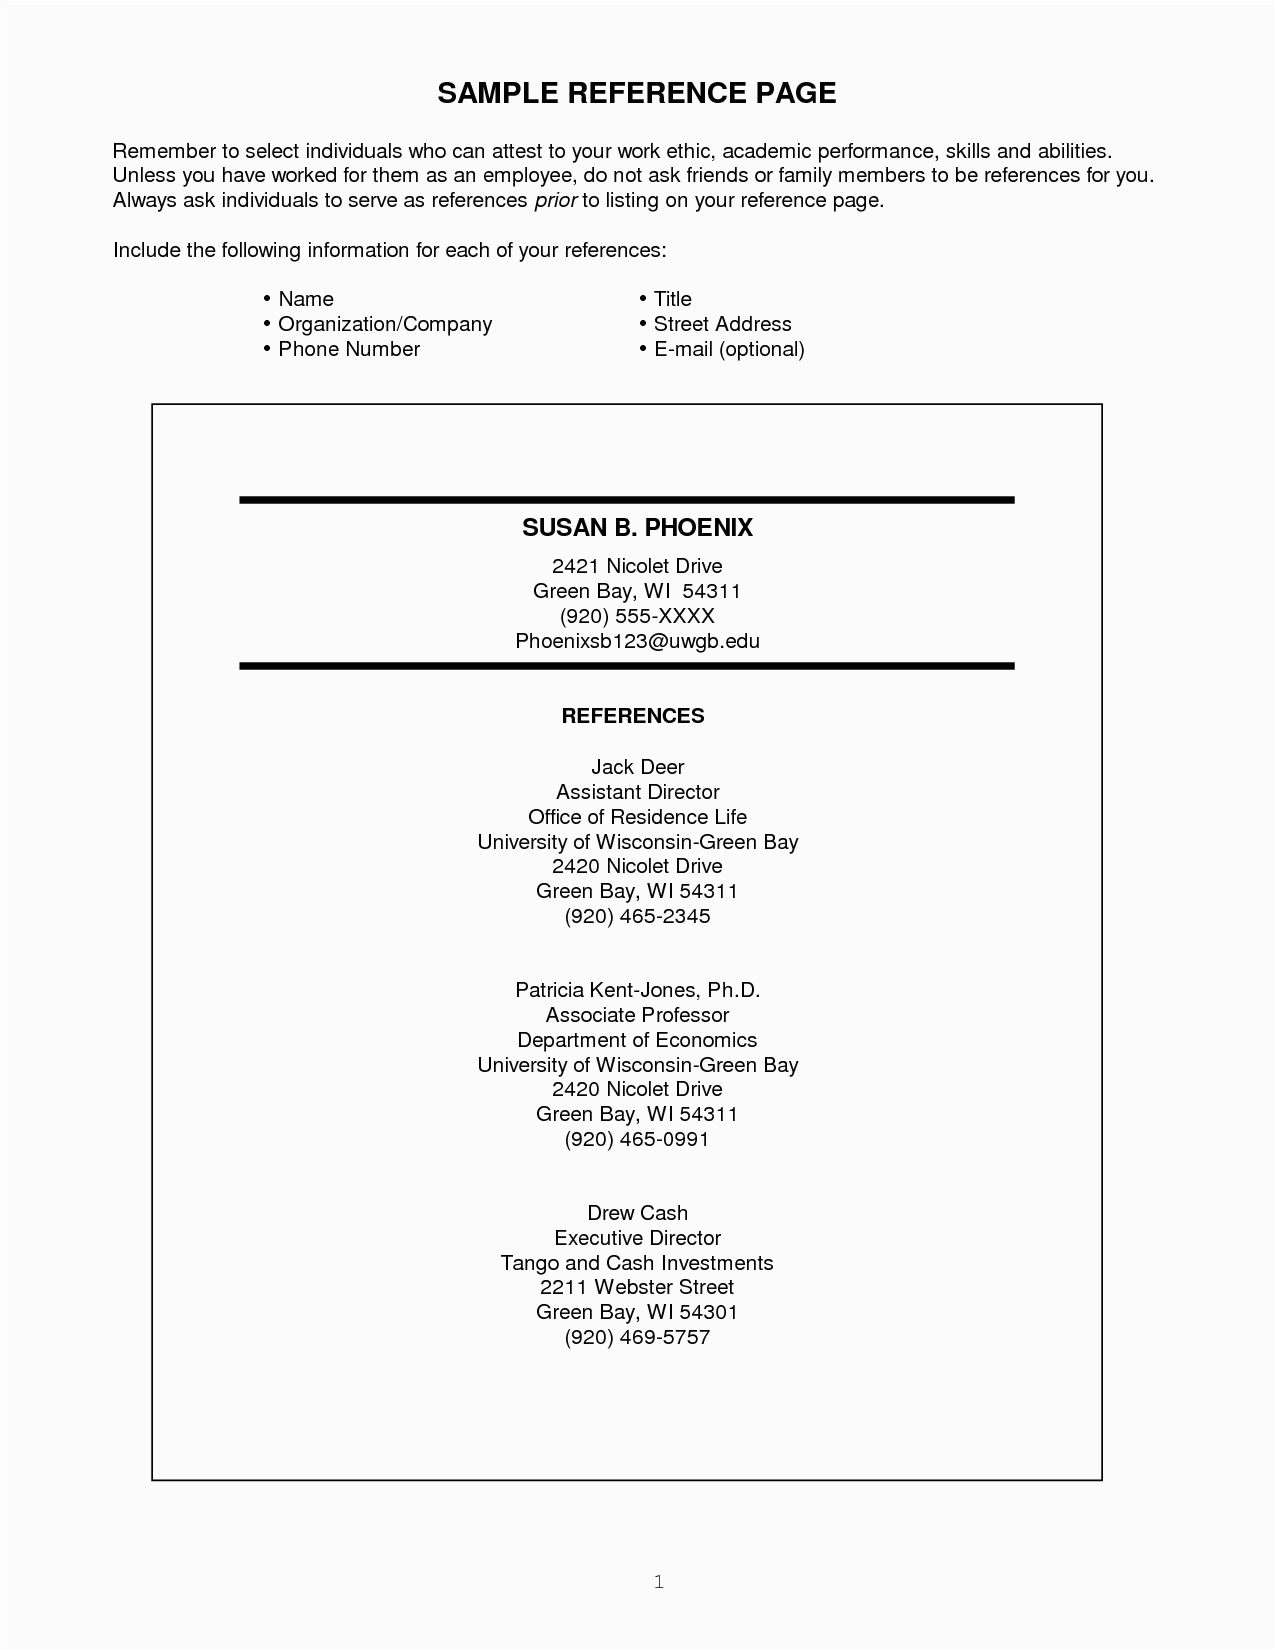 resume reference page 3191